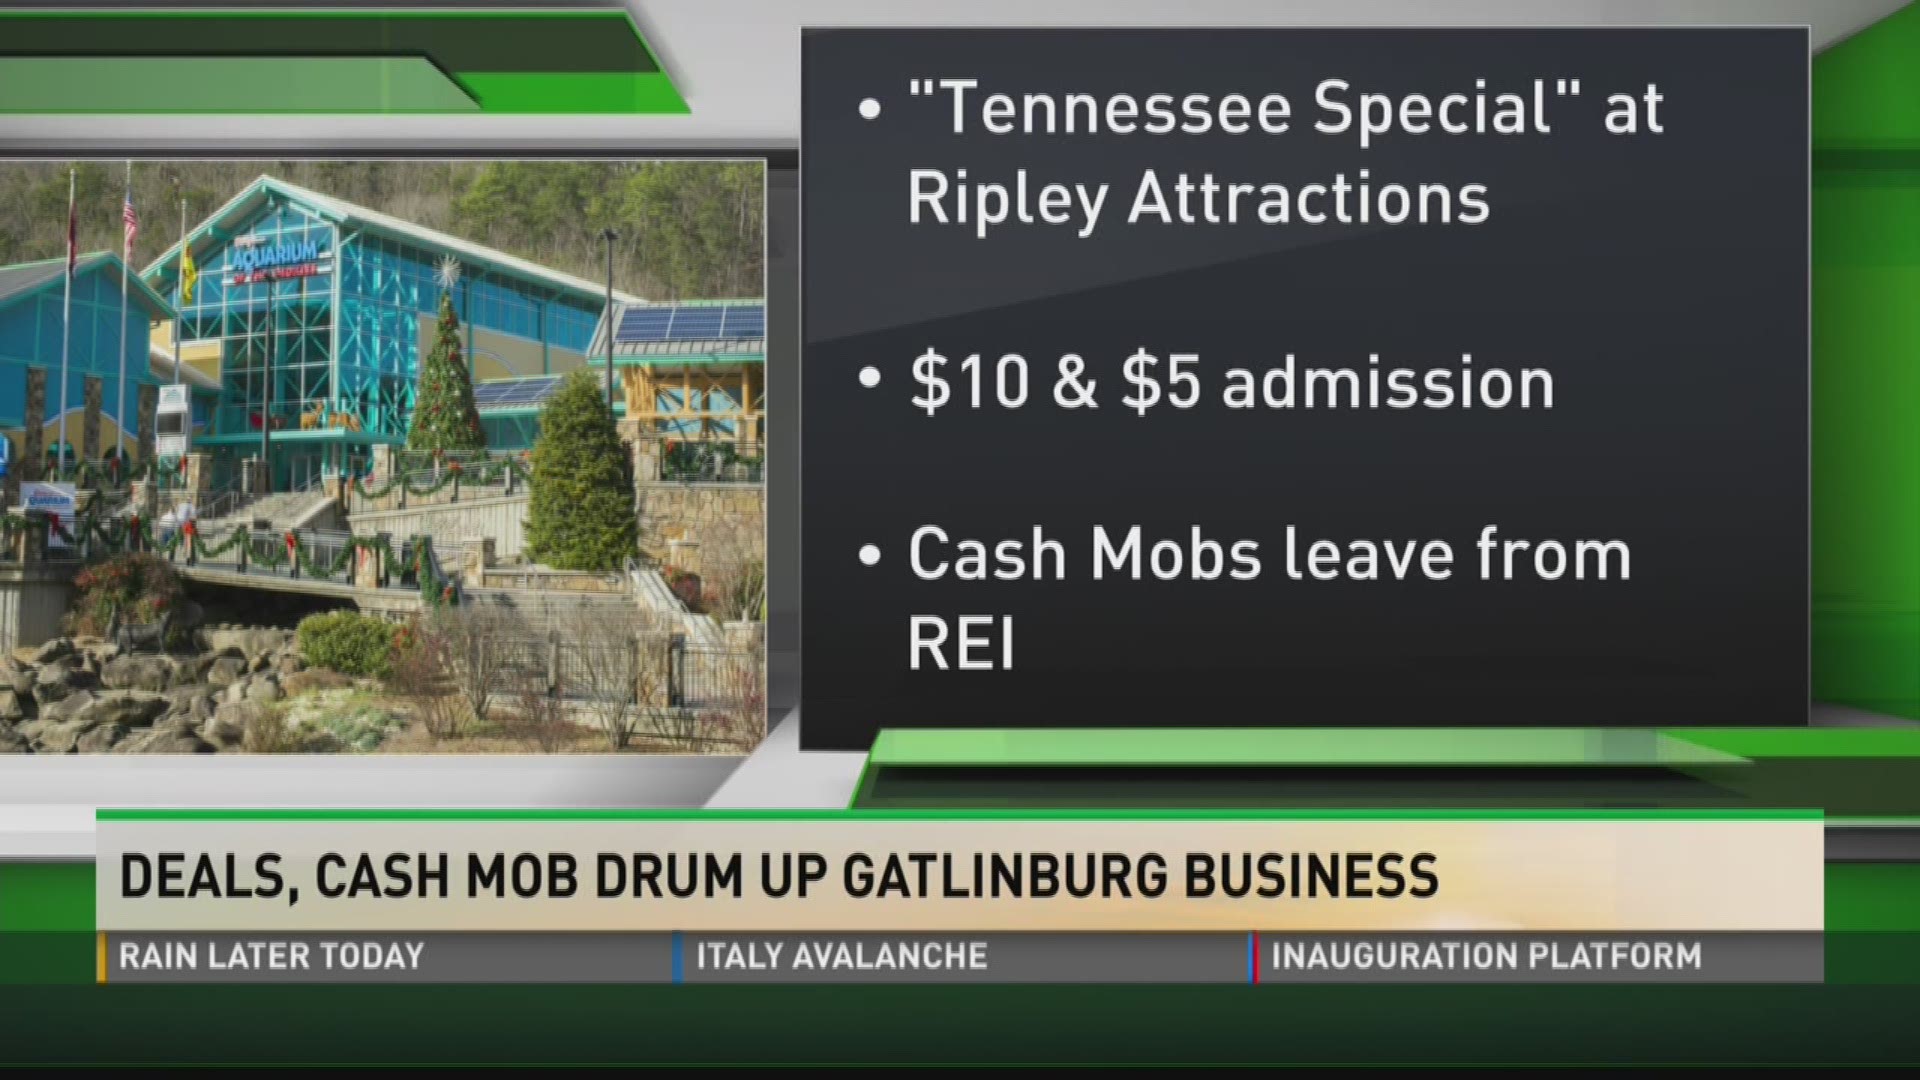 Local sponsors in Knoxville plan to host a cash mob in January 2017 to help economically stimulate Gatlinburg businesses after the recent wildfires.